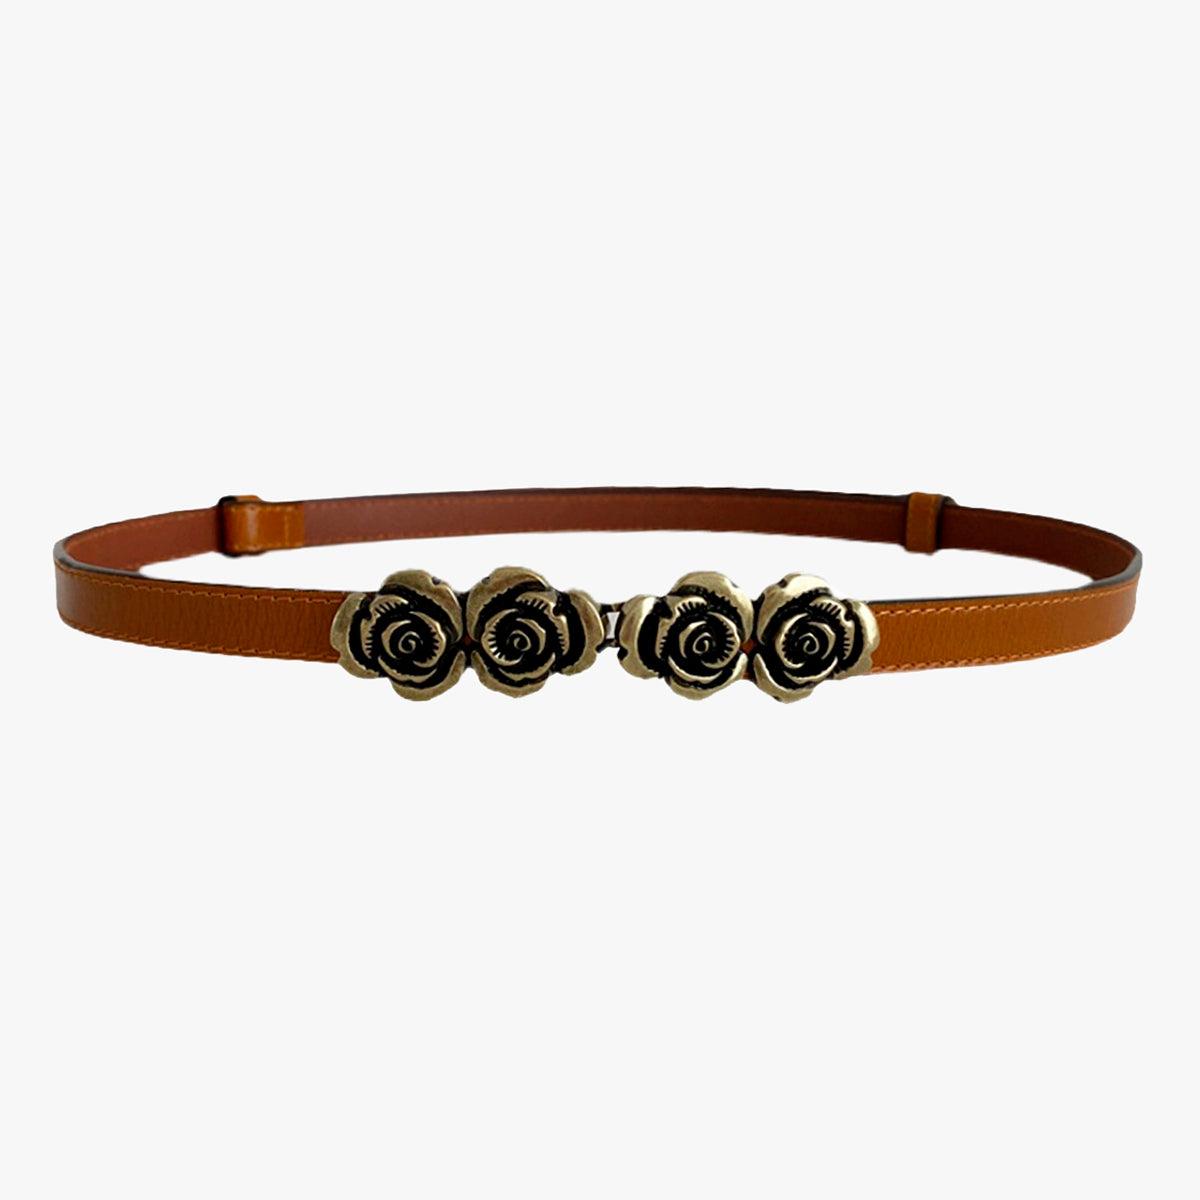 Four Roses Aesthetic Belt - Aesthetic Clothes Shop